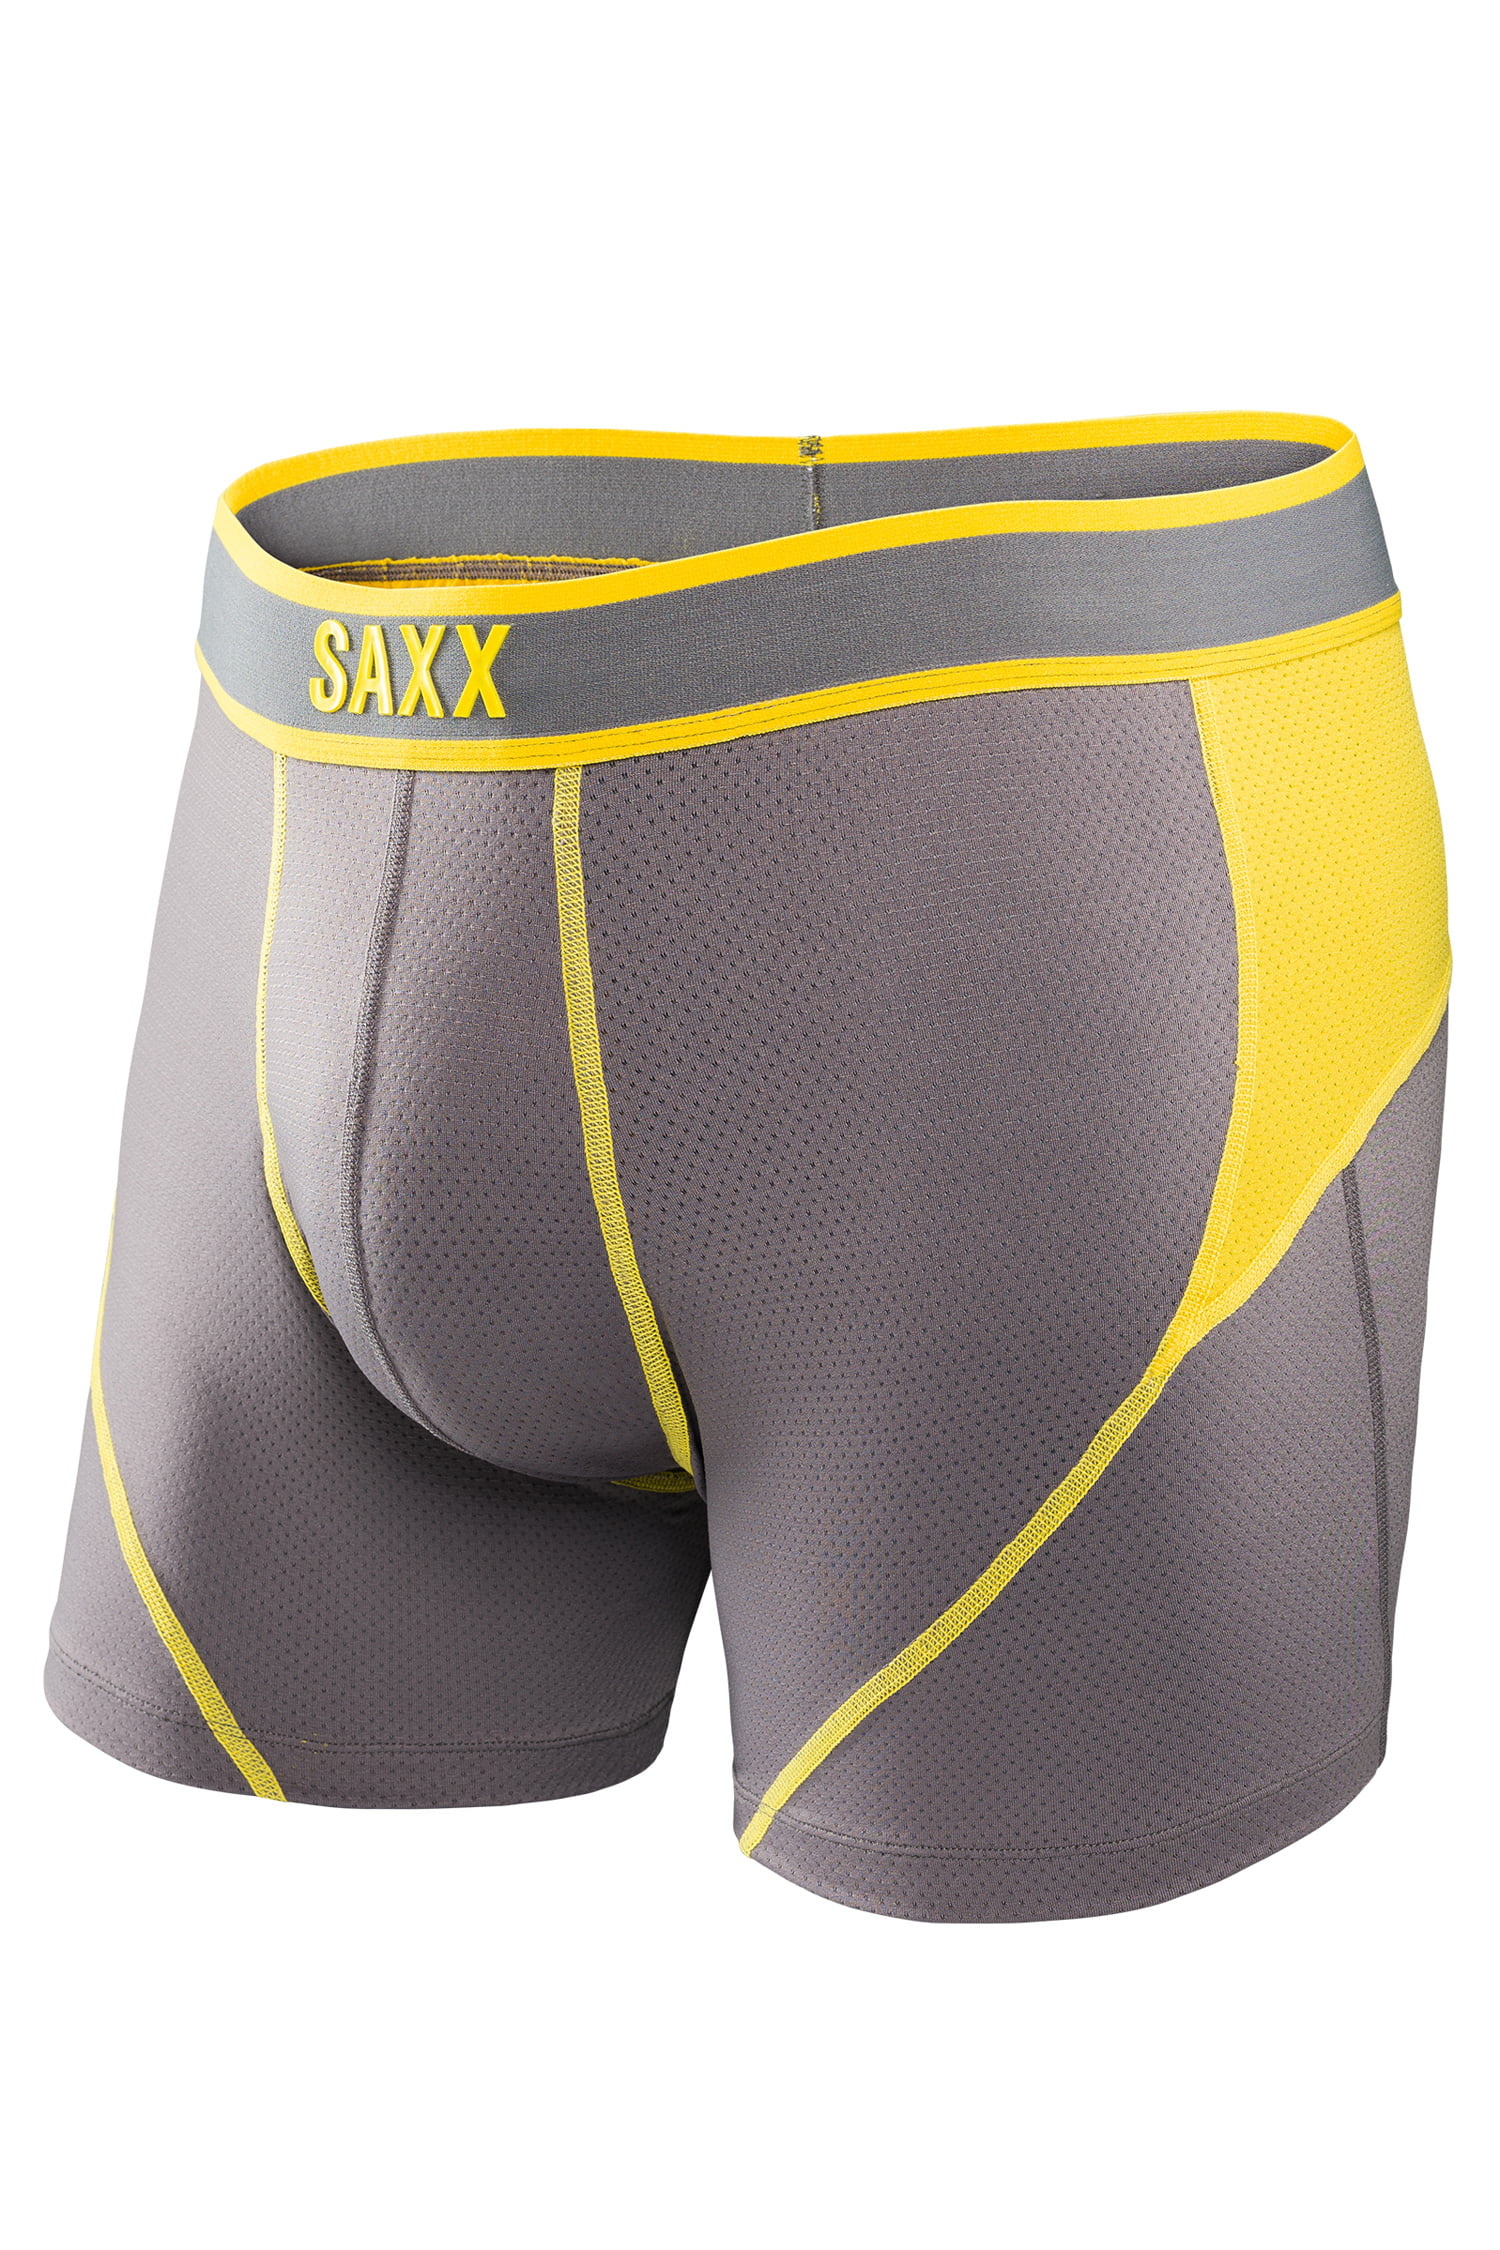 Saxx Mens Kinetic Performance Boxers Underwear Large Black Red 